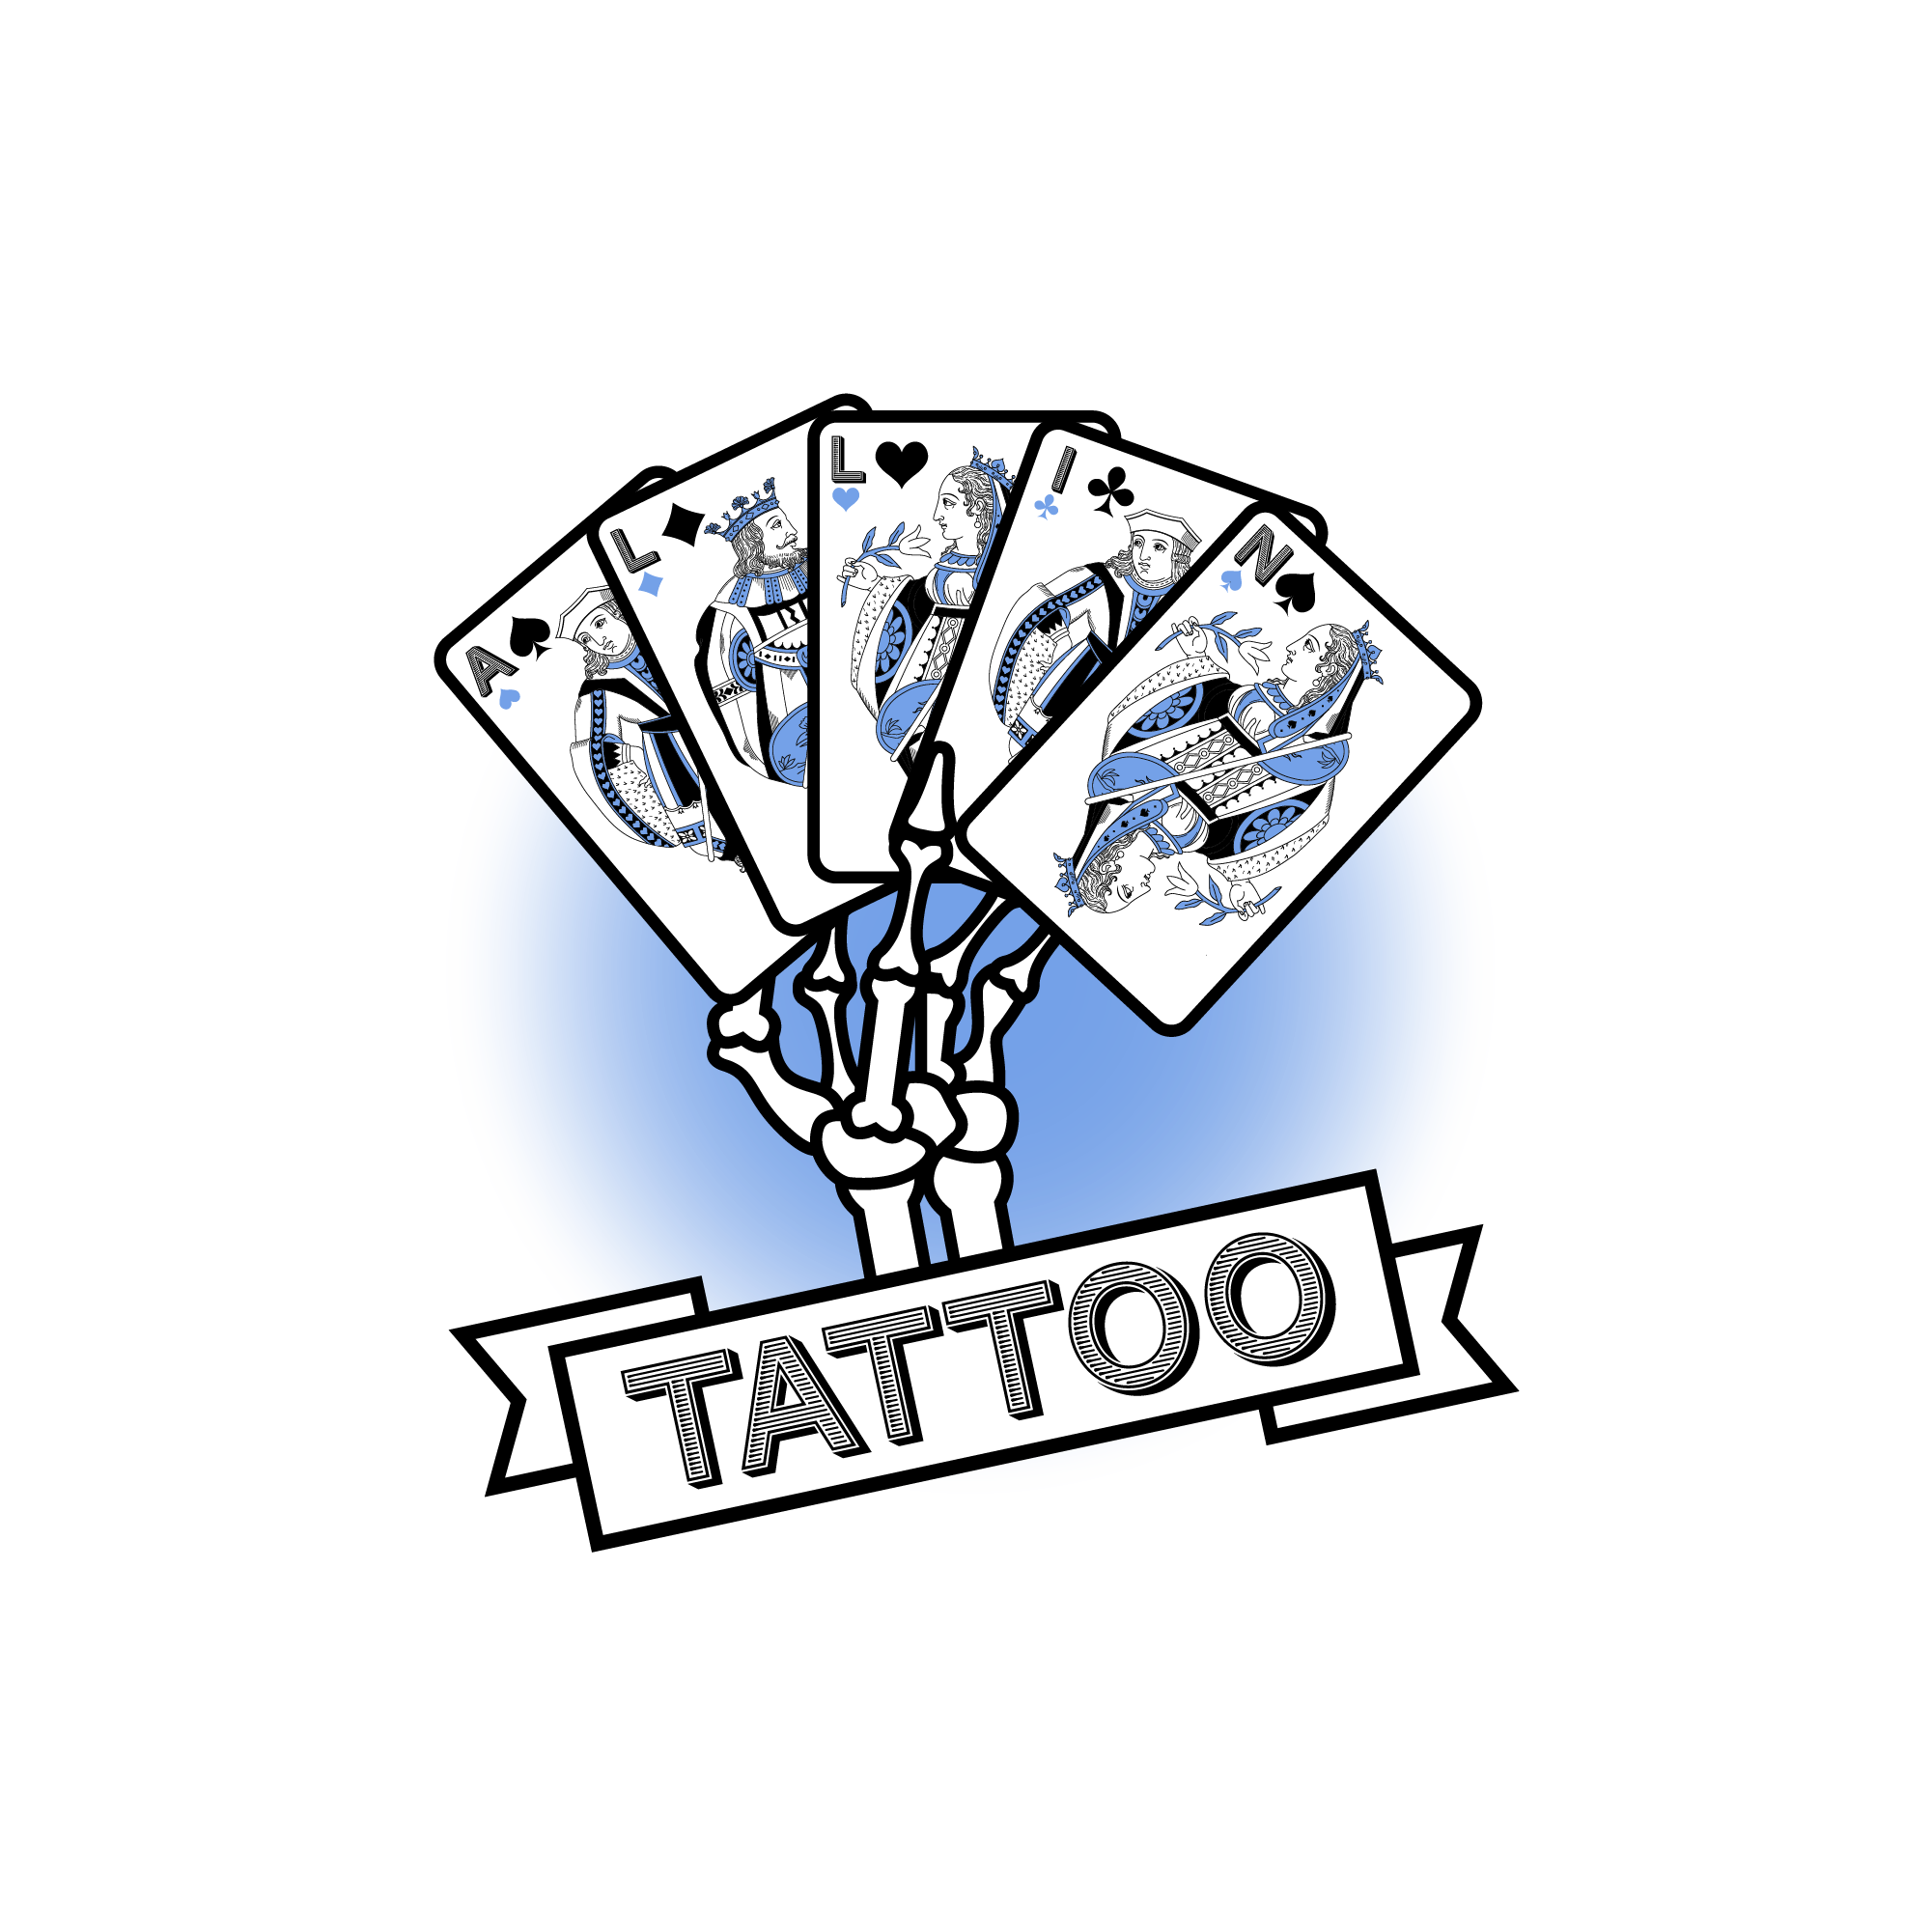 16 Best Channels About Tattoo on Youtube  Tutorials  Interested Videos